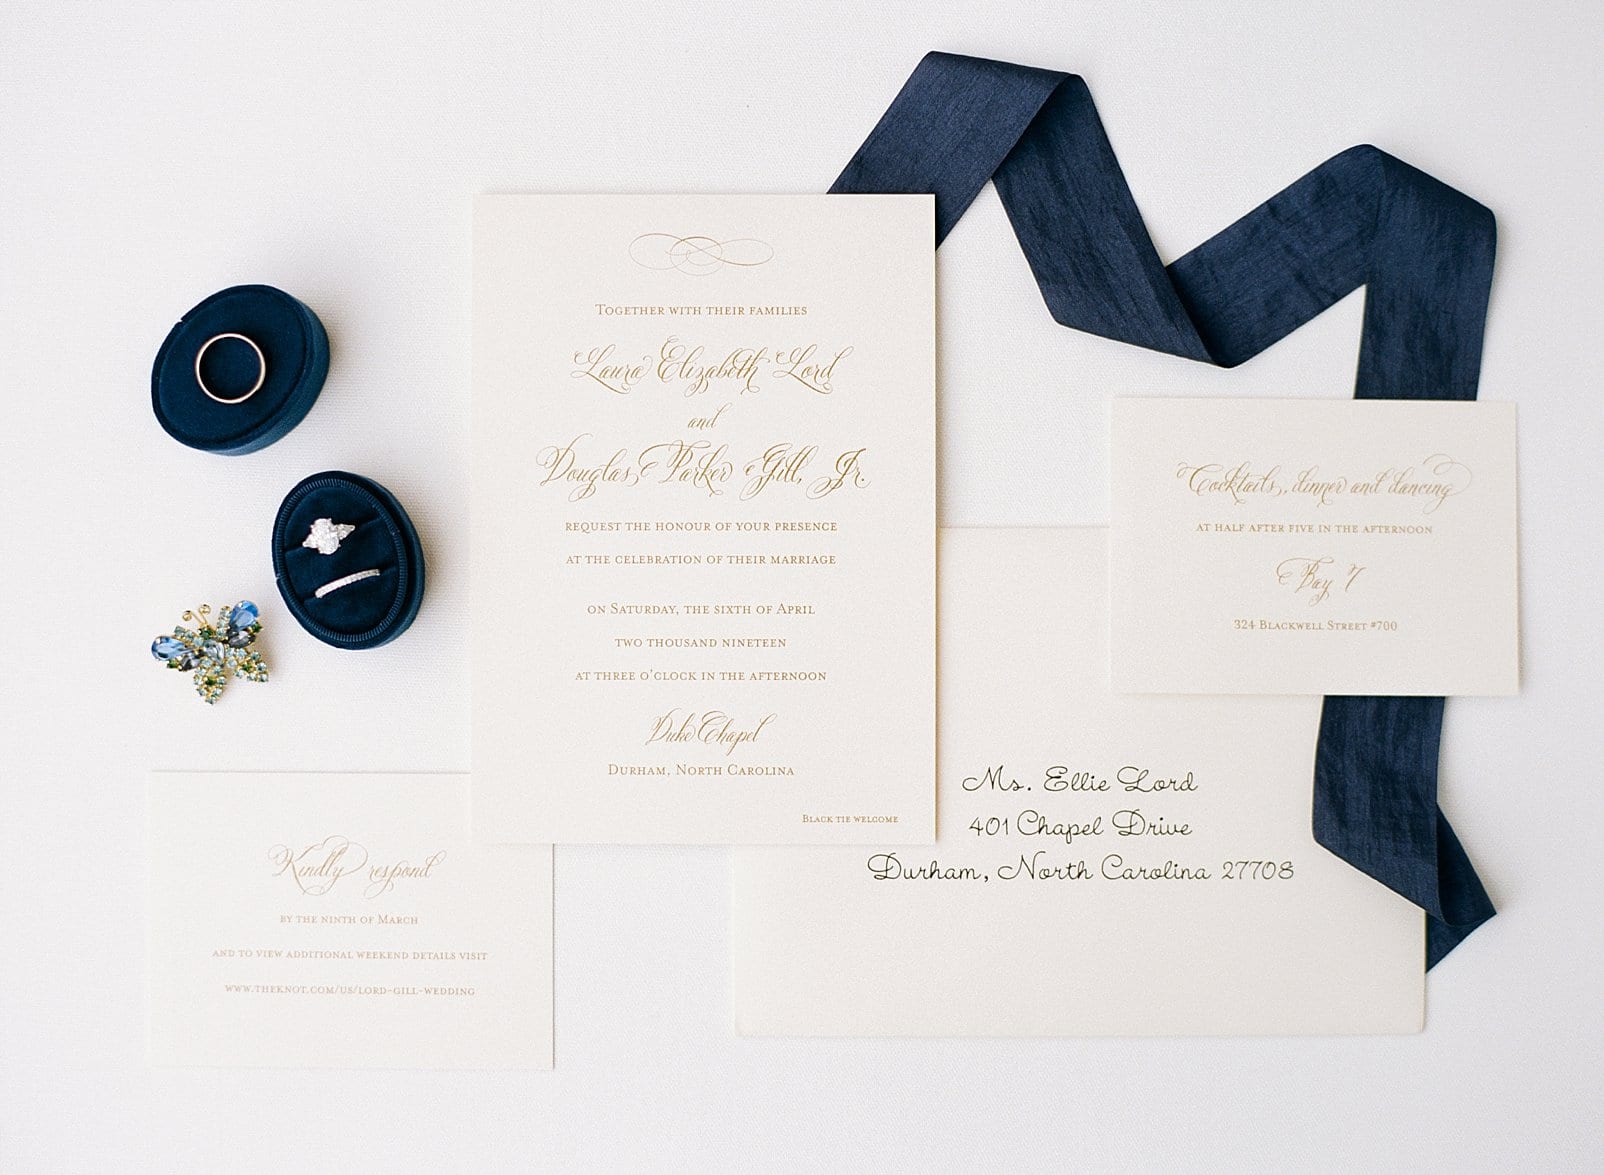 Reaves Engraving wedding invitation suite including cream paper with gold writing and navy blue ribbon photo